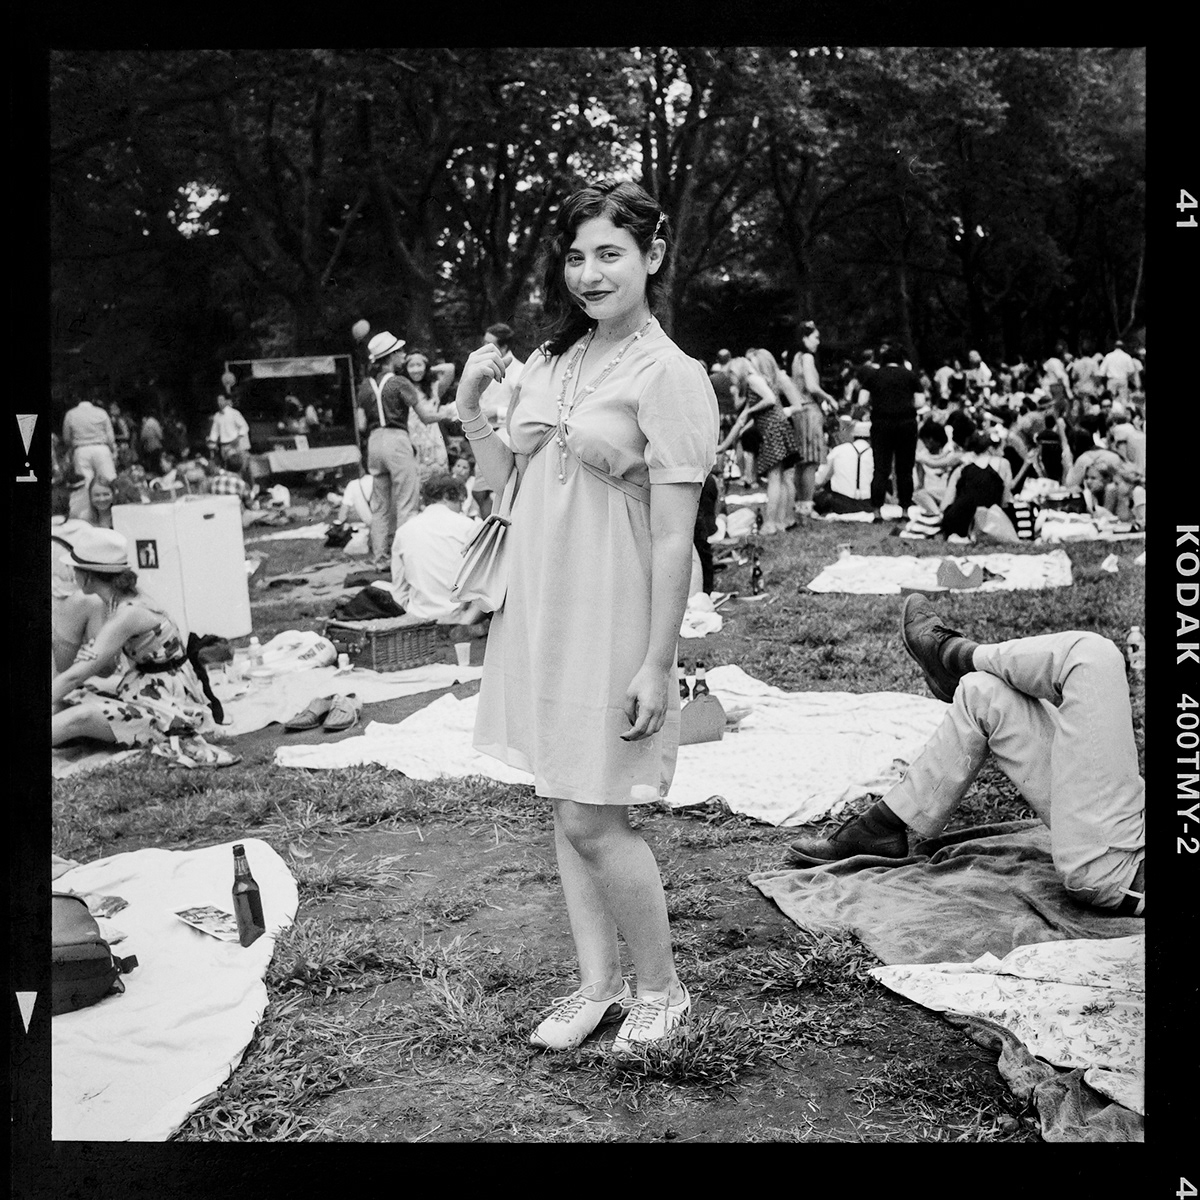 jazz age lawn party summer Governor's Island Island New York Event 1920's Michael Arenella  Dreamland Orchestra Dixieland ragtime